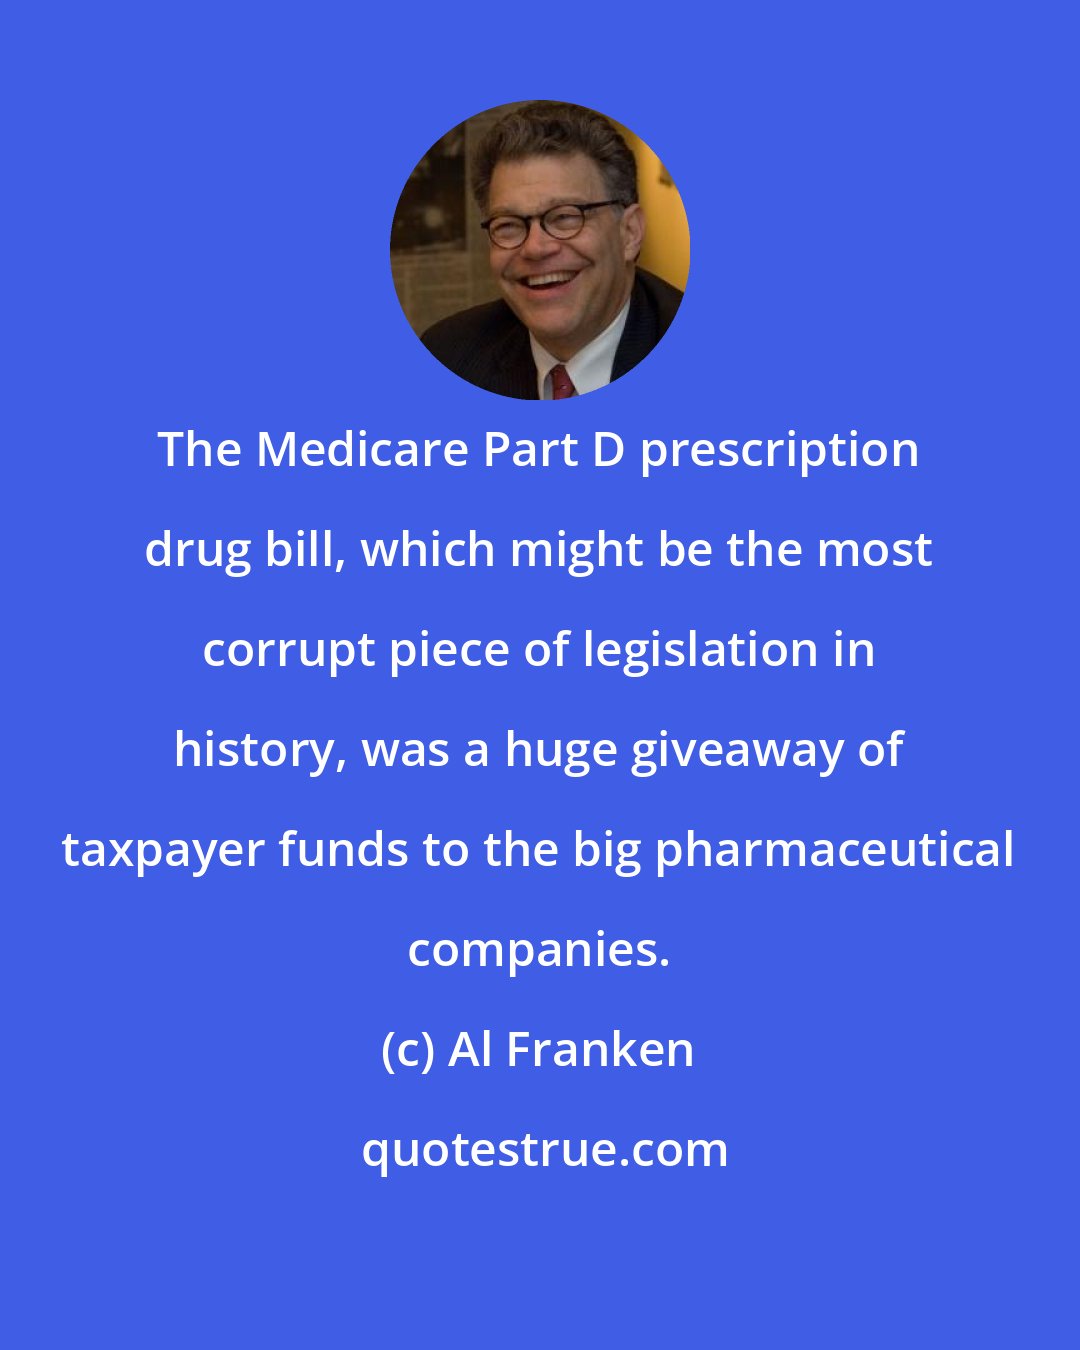 Al Franken: The Medicare Part D prescription drug bill, which might be the most corrupt piece of legislation in history, was a huge giveaway of taxpayer funds to the big pharmaceutical companies.